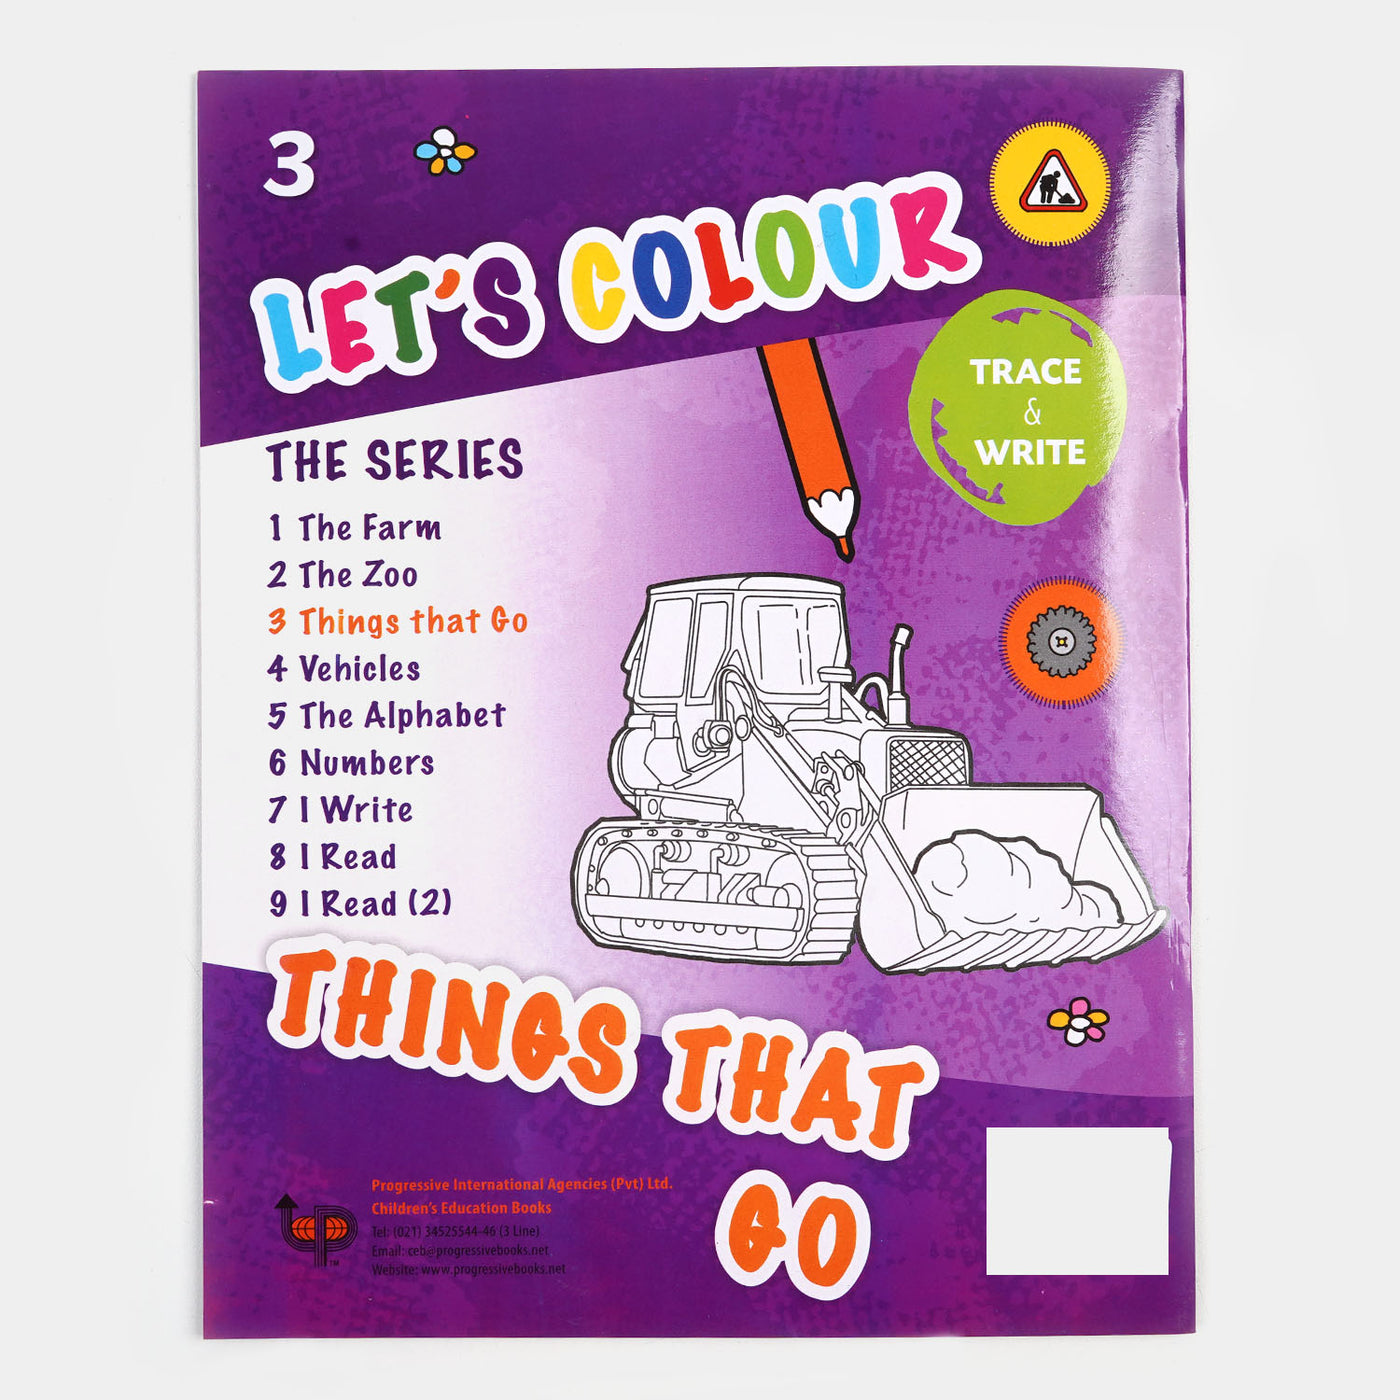 Let's Colour Things That Go Book For Kids